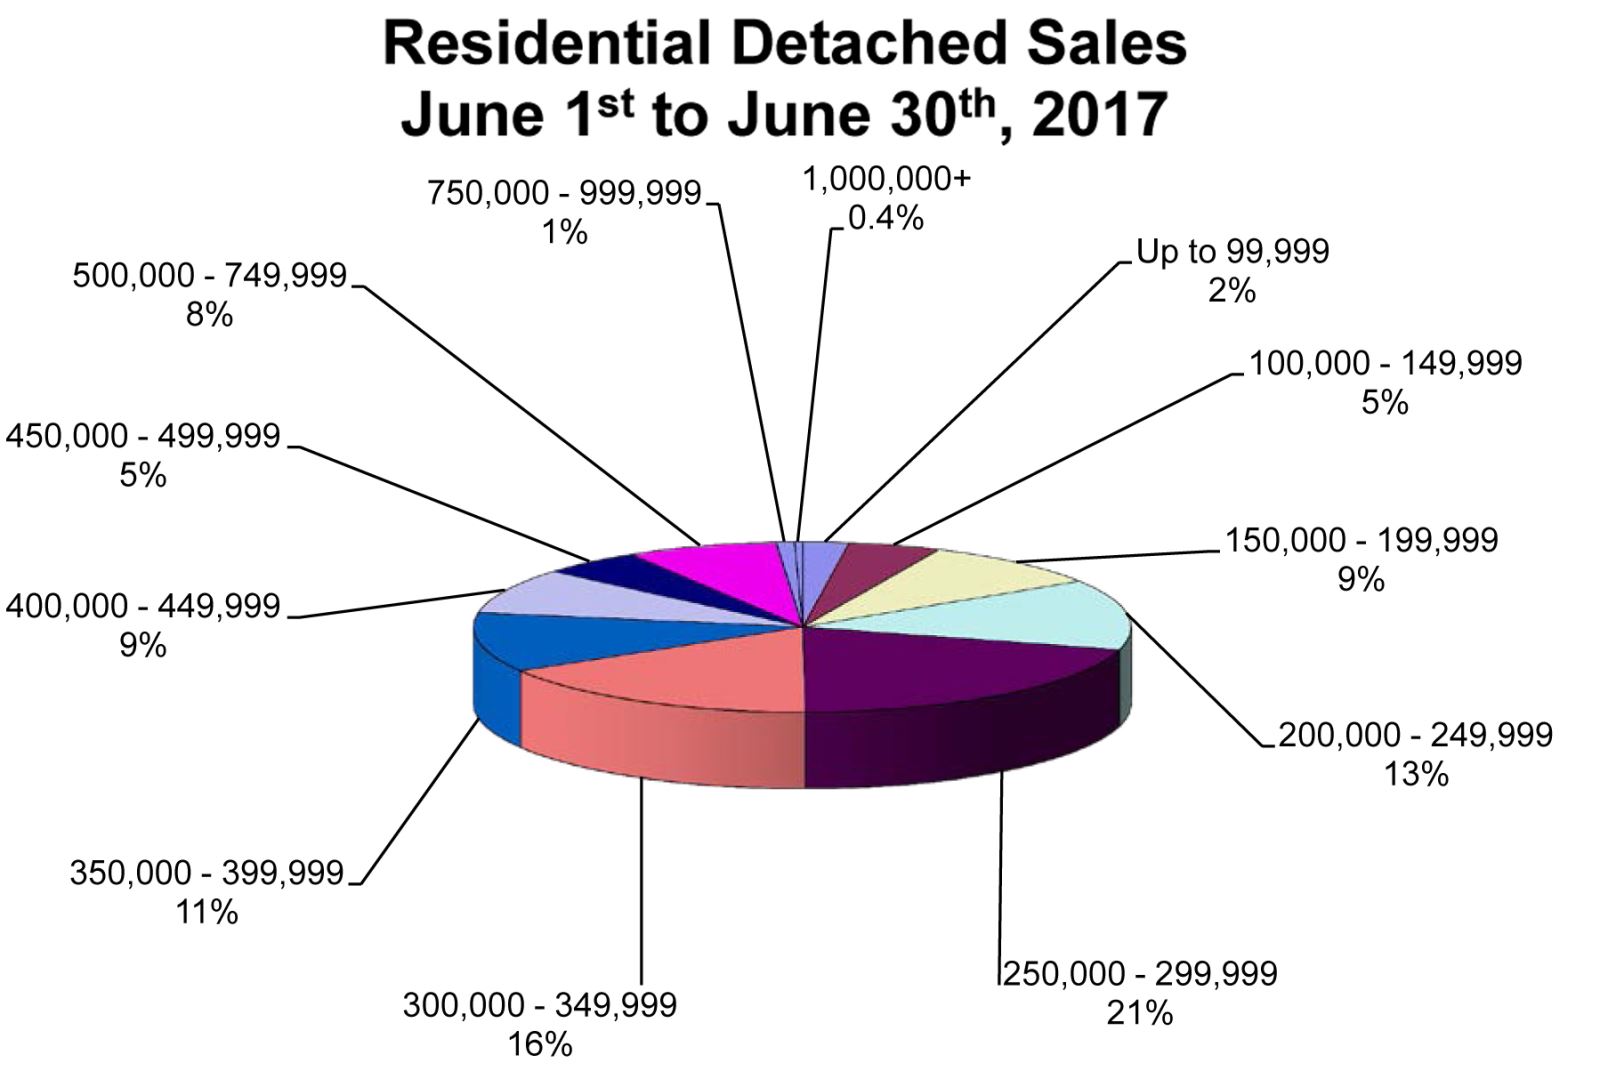 Residential Detached Sales Pie Chart